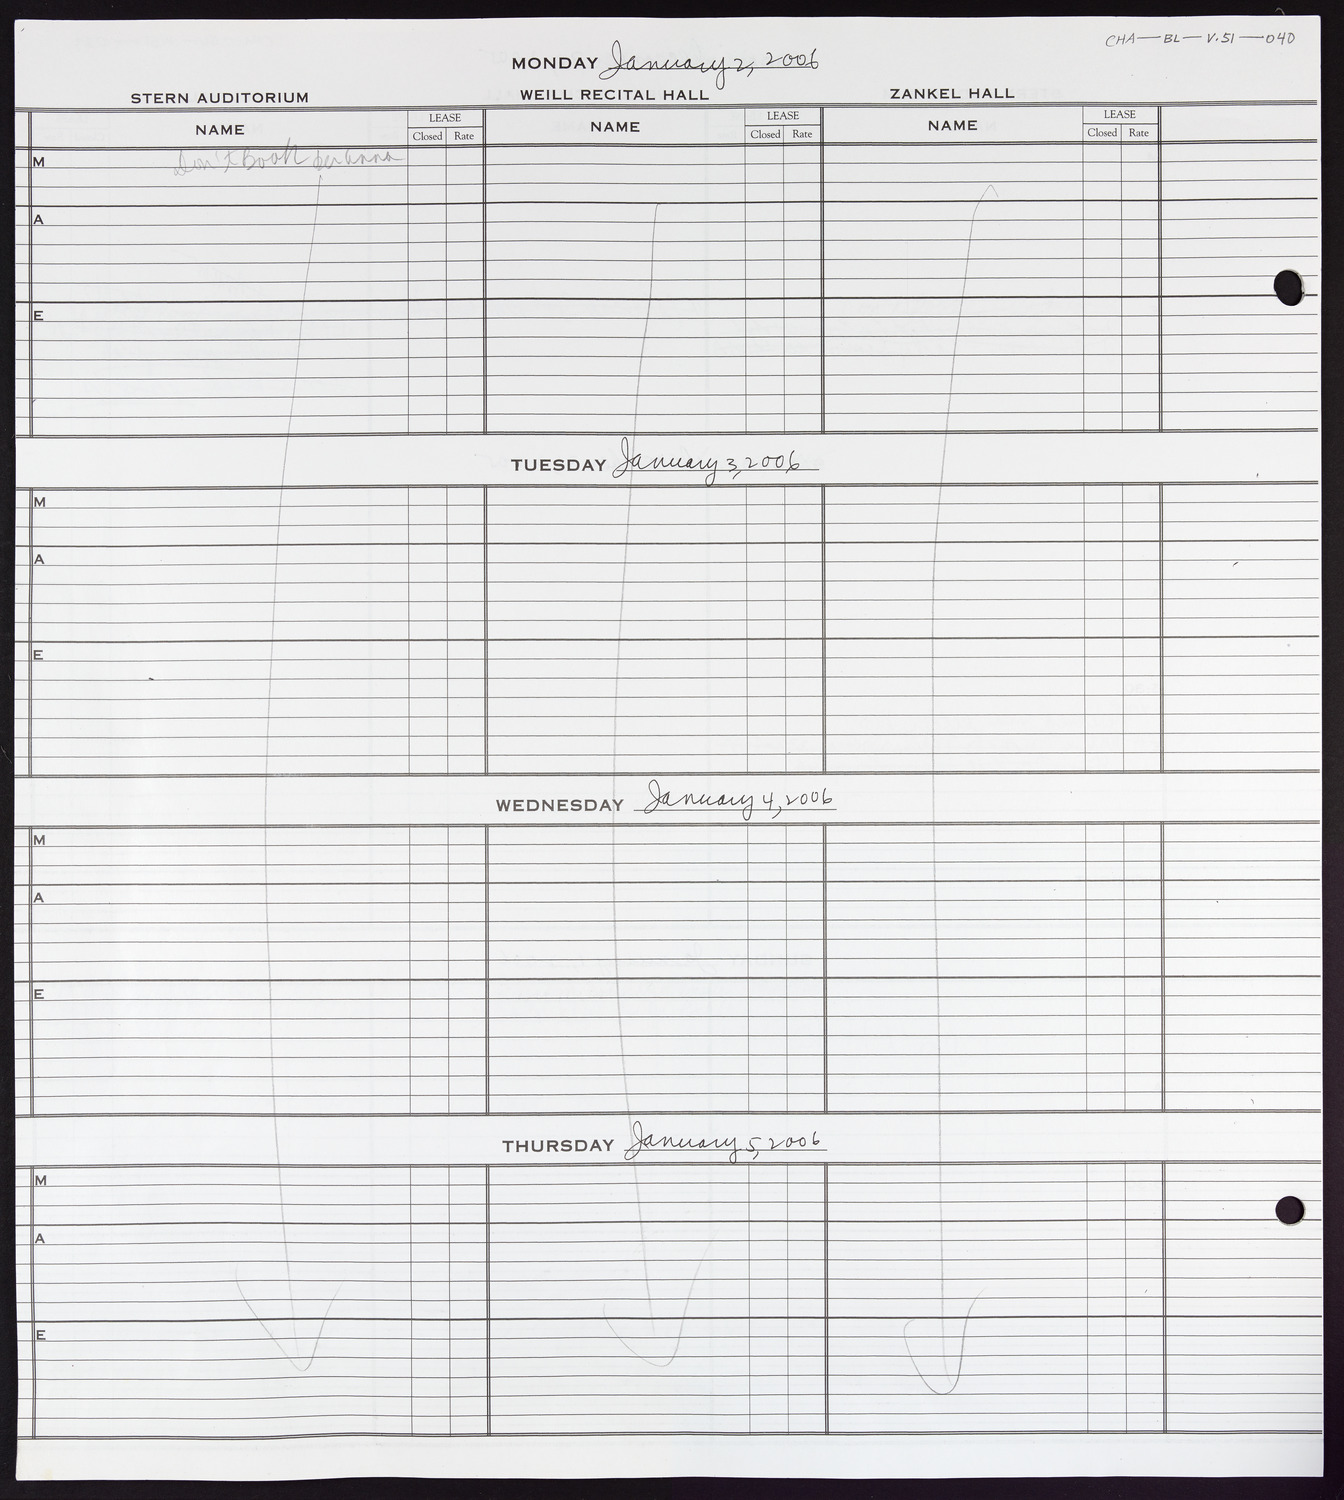 Carnegie Hall Booking Ledger, volume 51, page 40